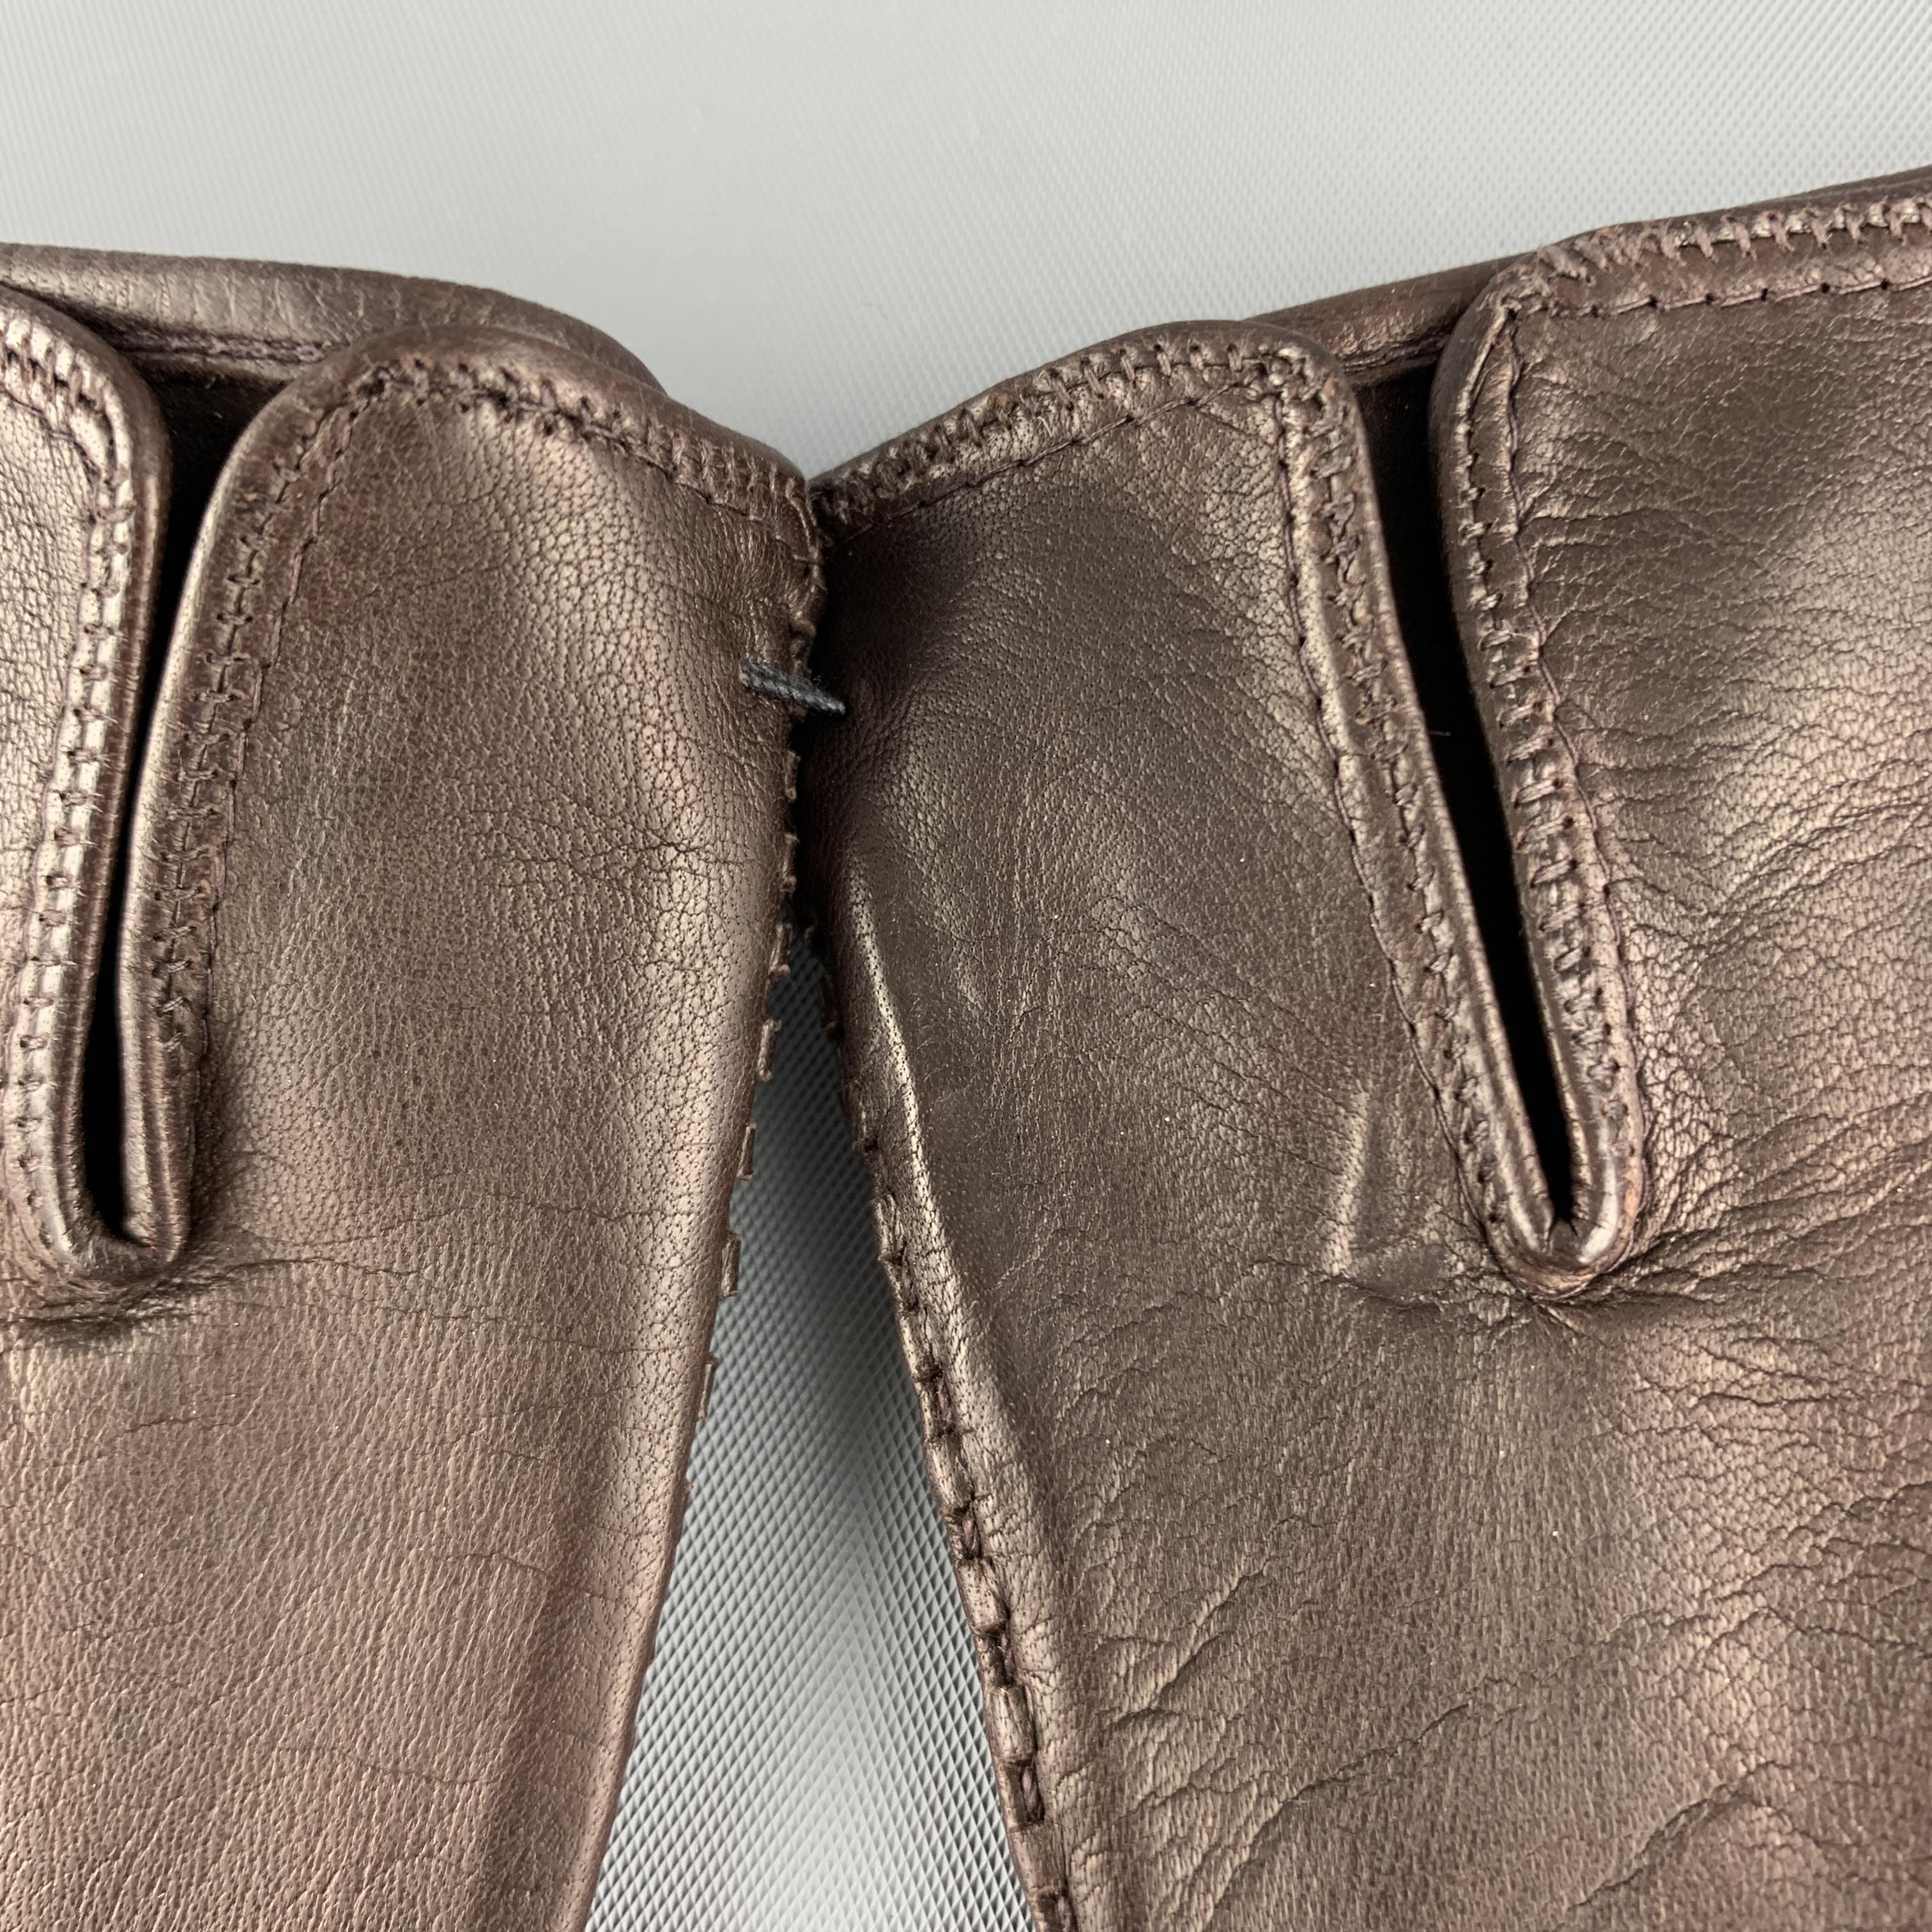 MADOVA gloves come in brown smooth leather with whipstitch trim. With bag. Made in Italy.

Brand New.
Marked: 8

Length: 9 in.
Width: 3 in.